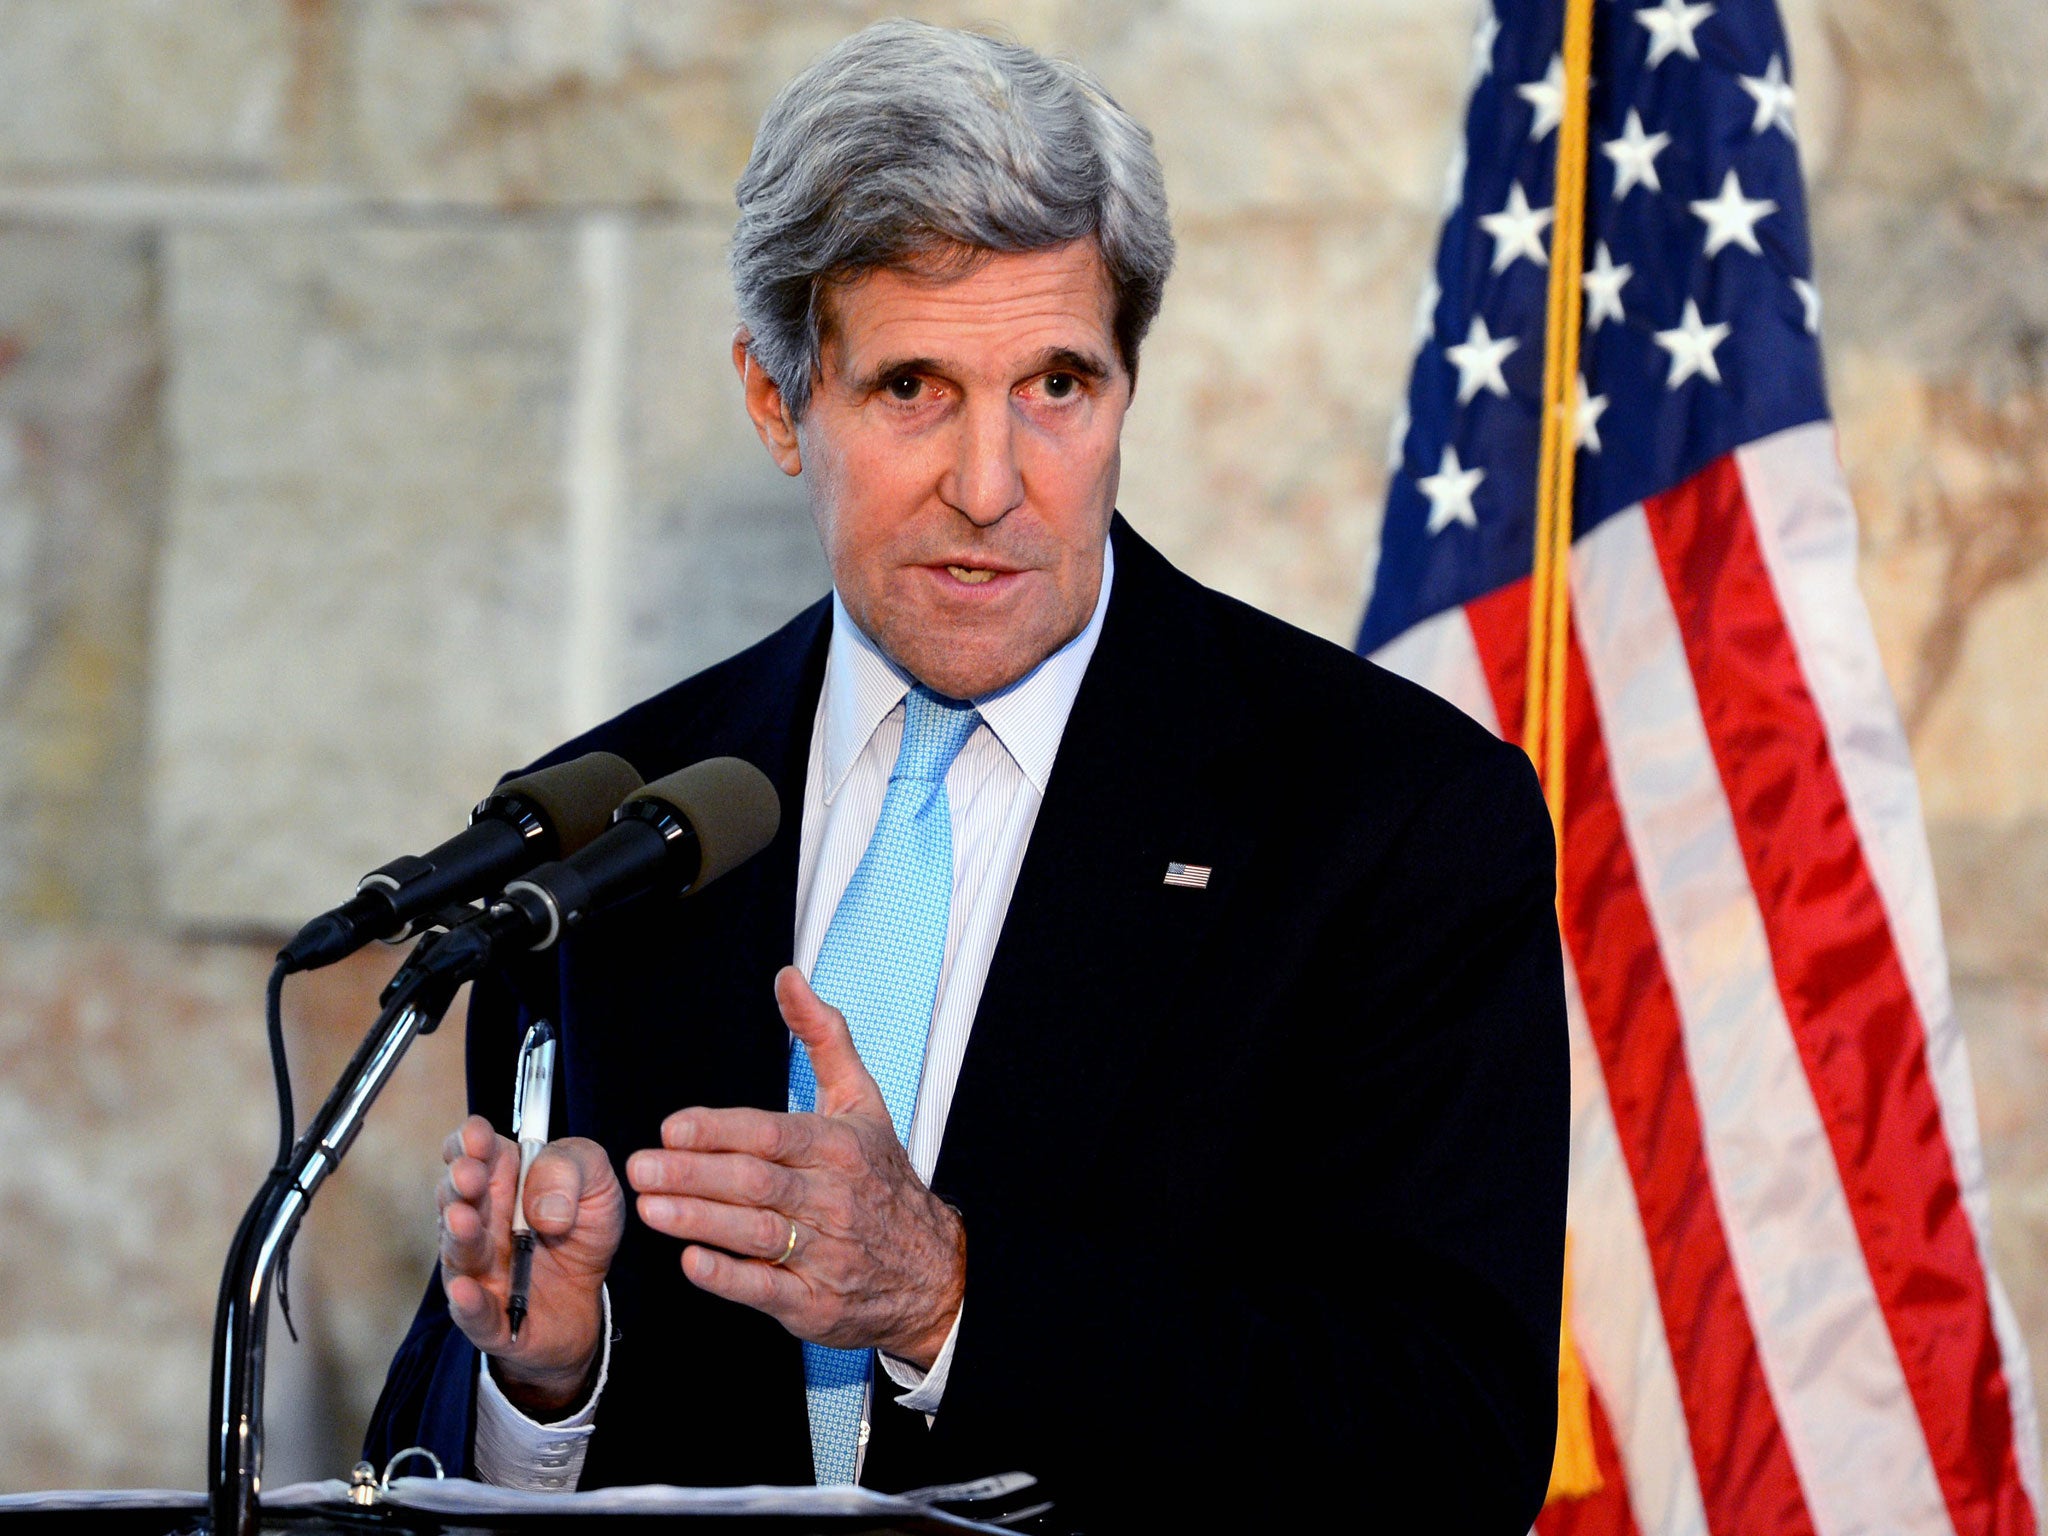 US Secretary of State John Kerry during a press conference in Tel Aviv, Israel